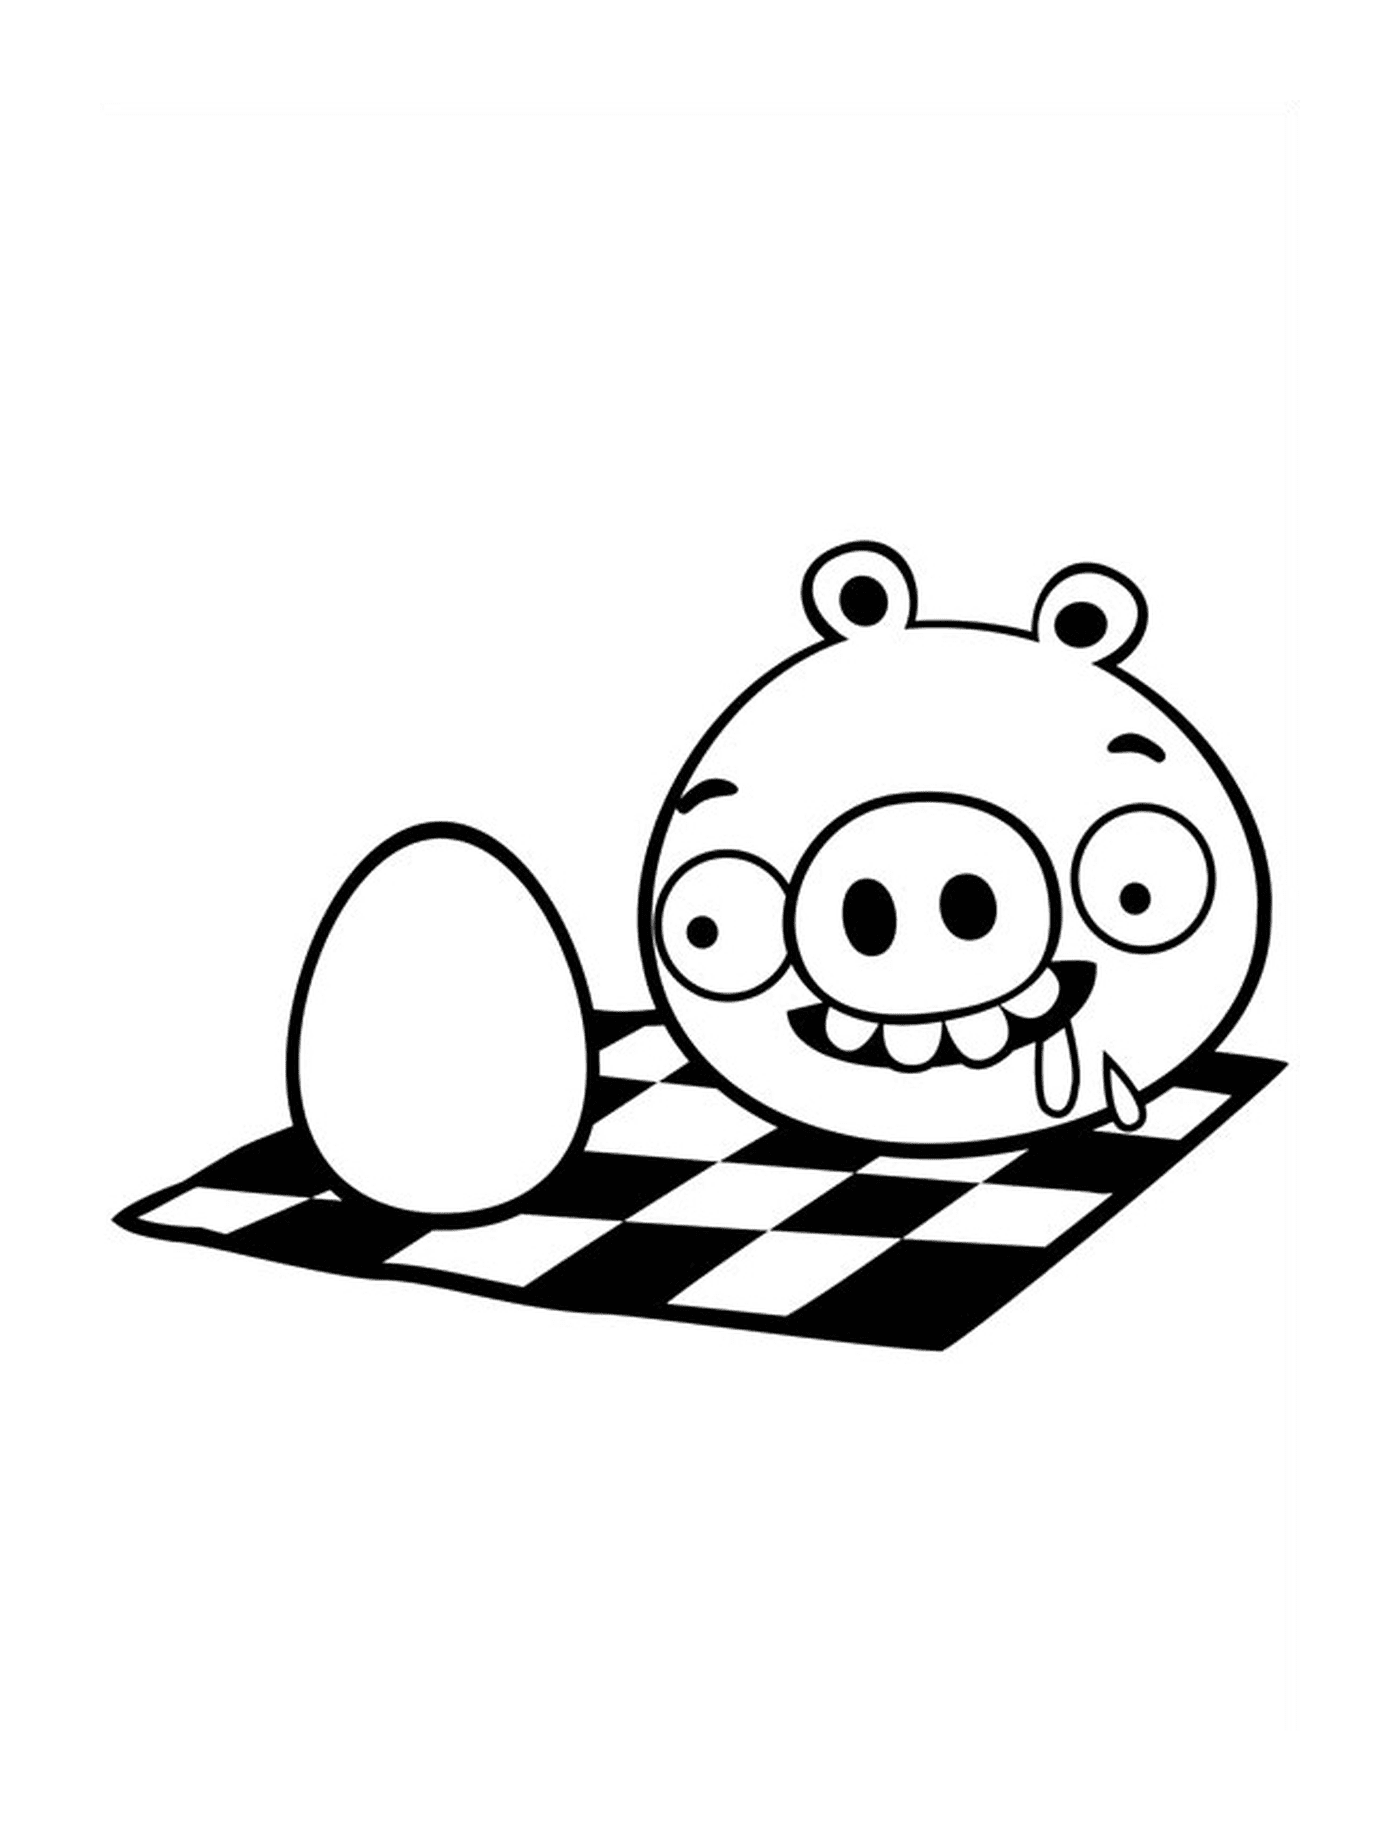  Angry Birds pig wants to eat egg 